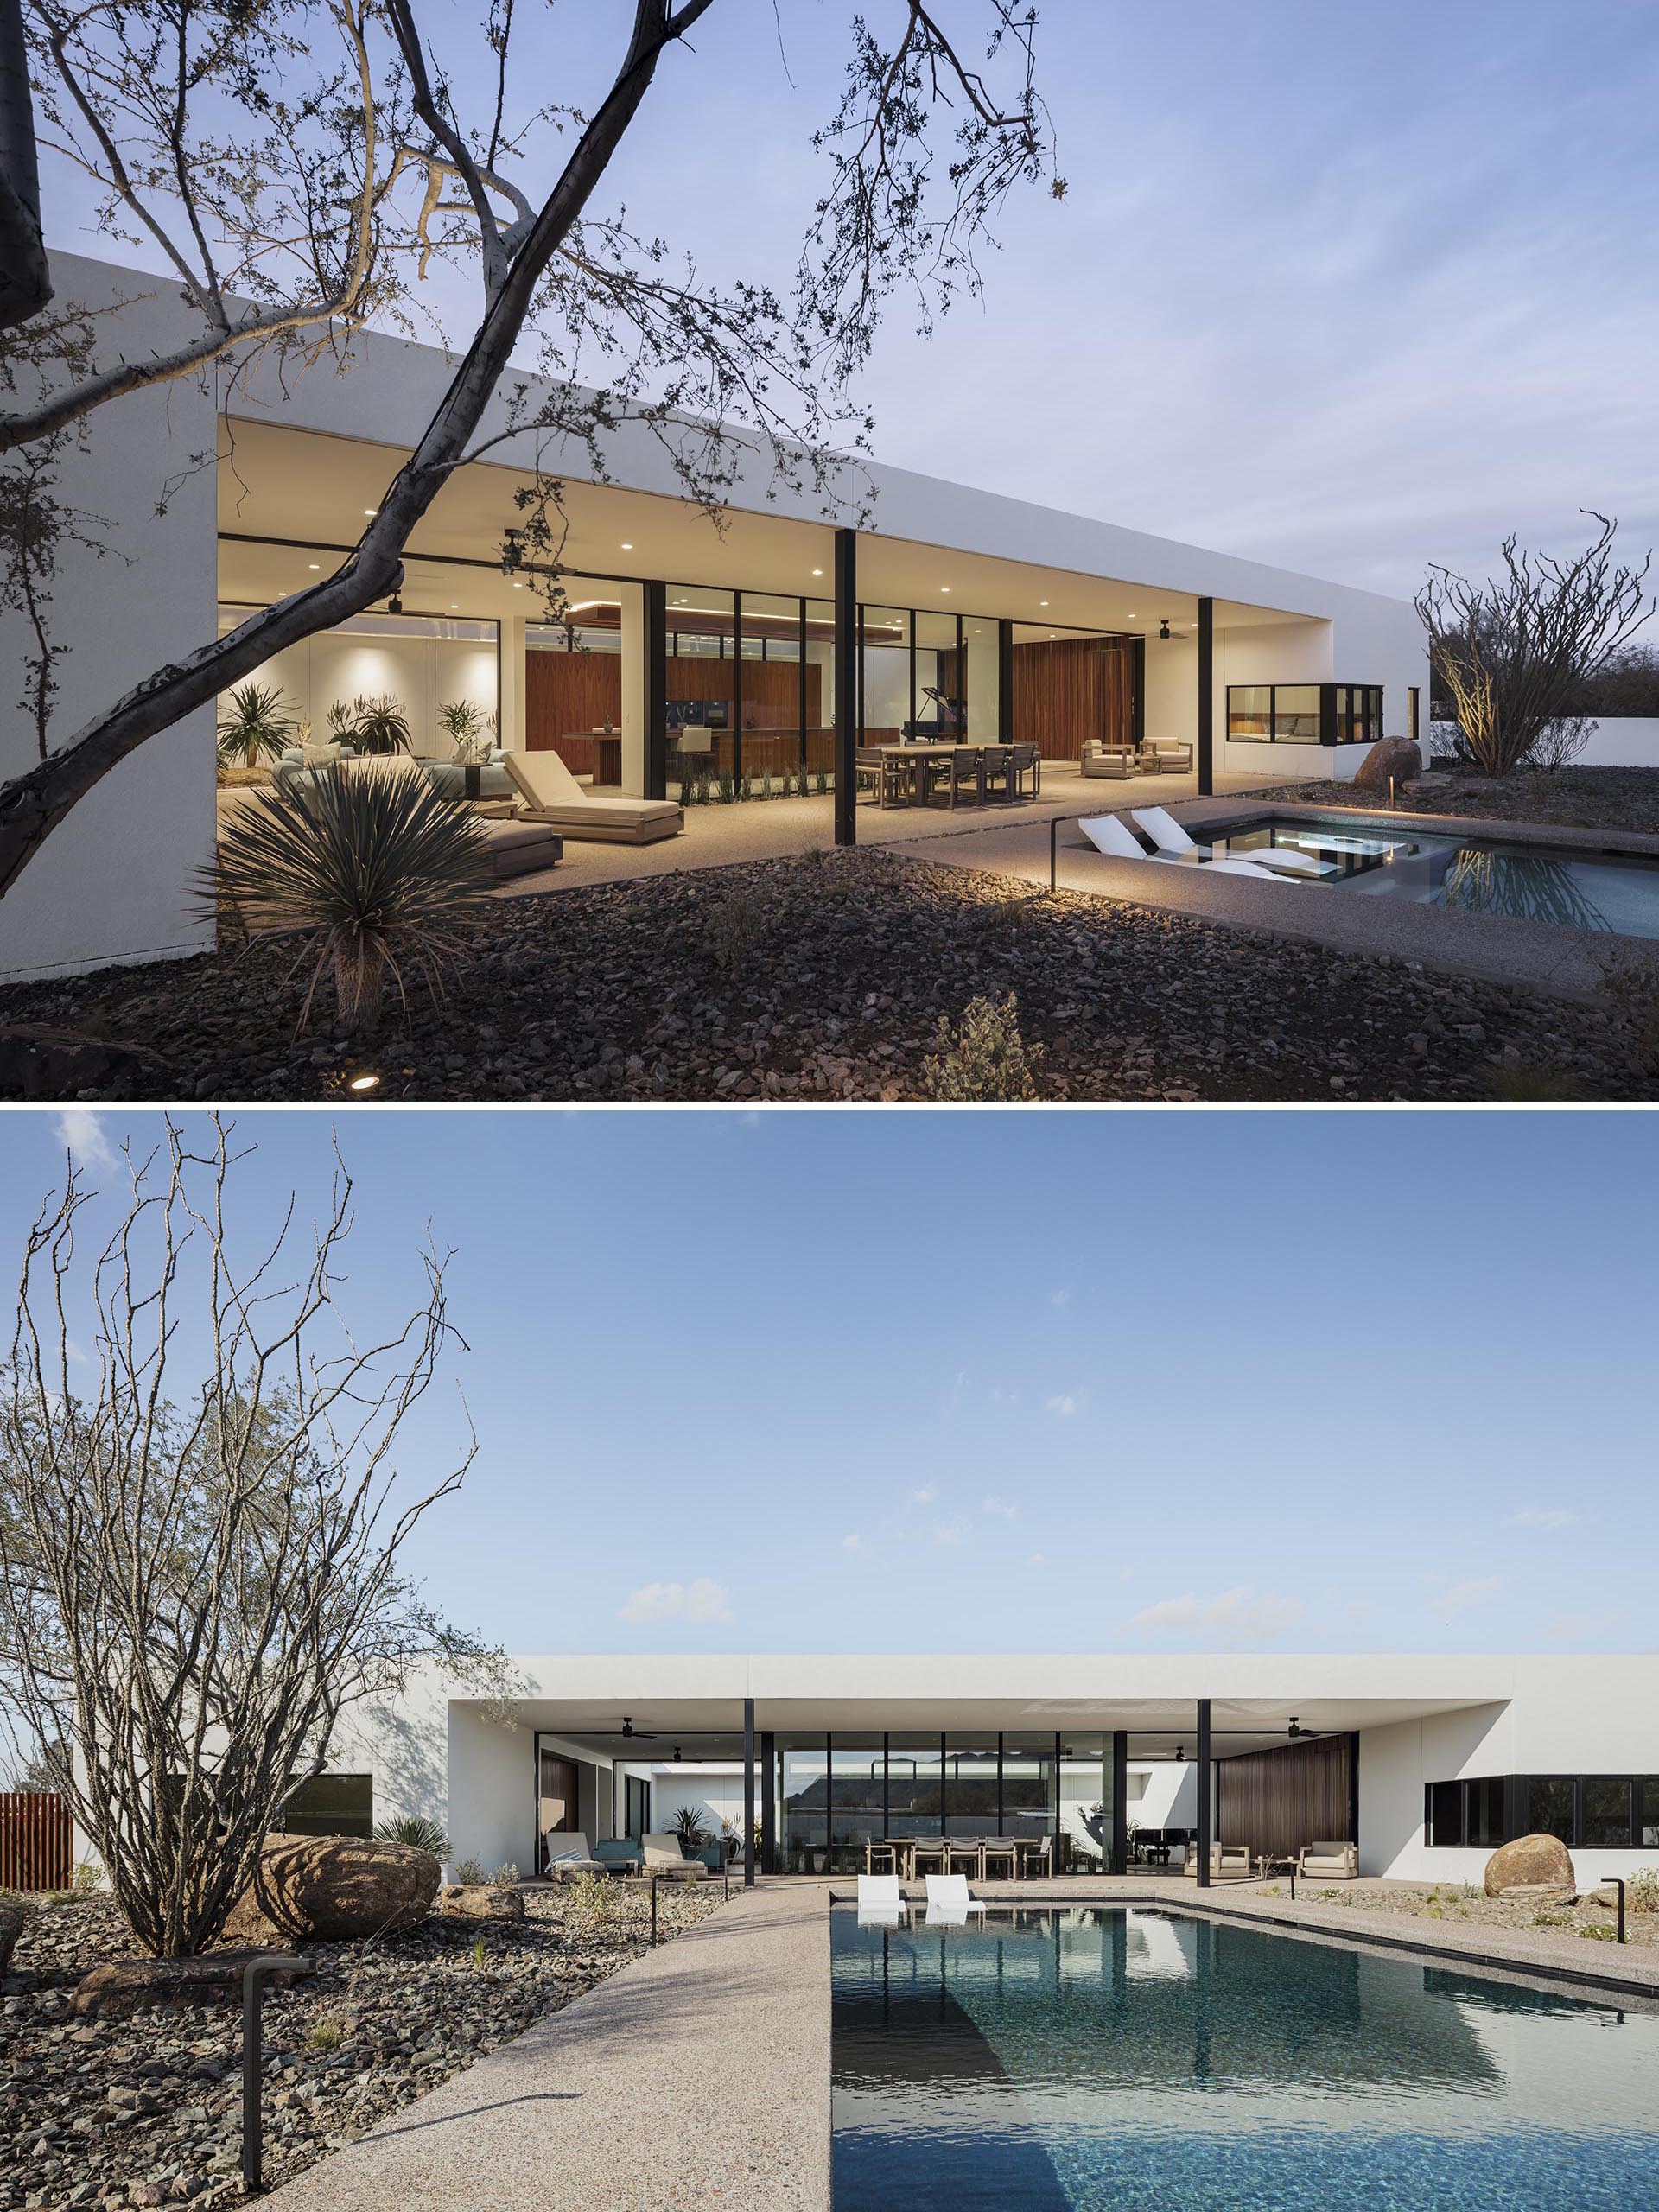 A modern desert house with a covered patio and a swimming pool.